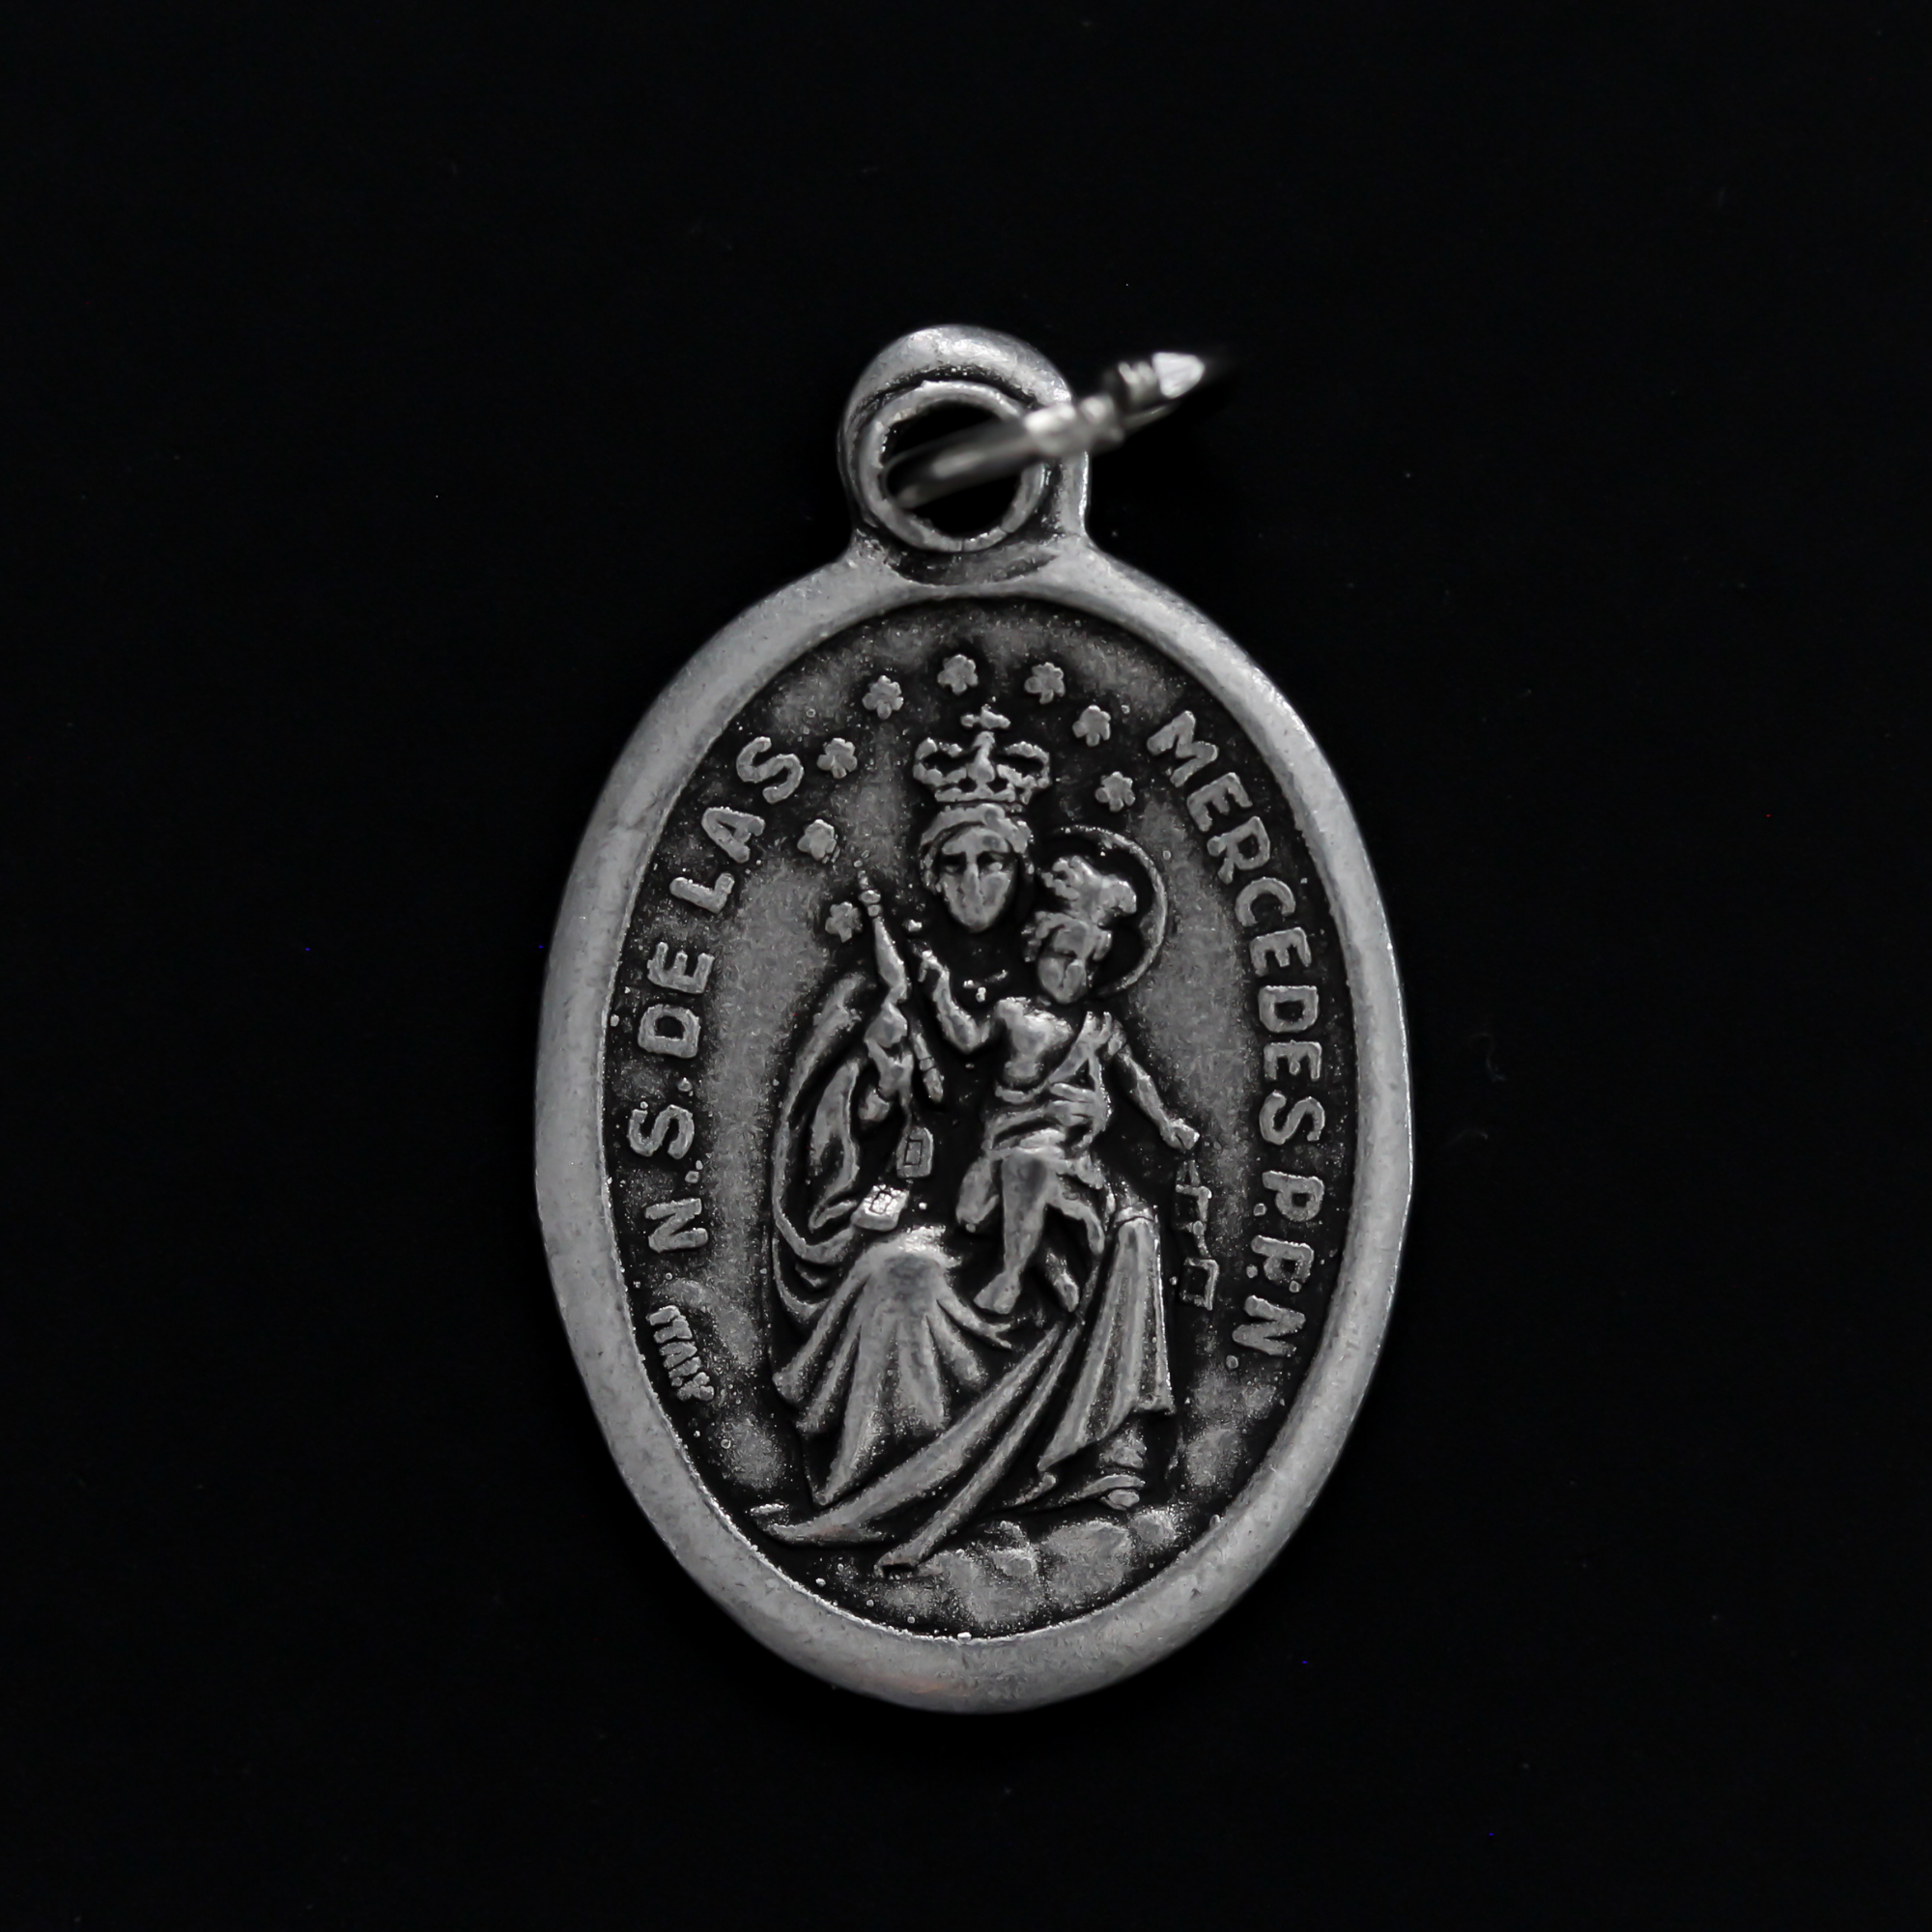 Virgin of Mercy medal that depicts Our Lady on the front and is marked "Pray For Us" on the back